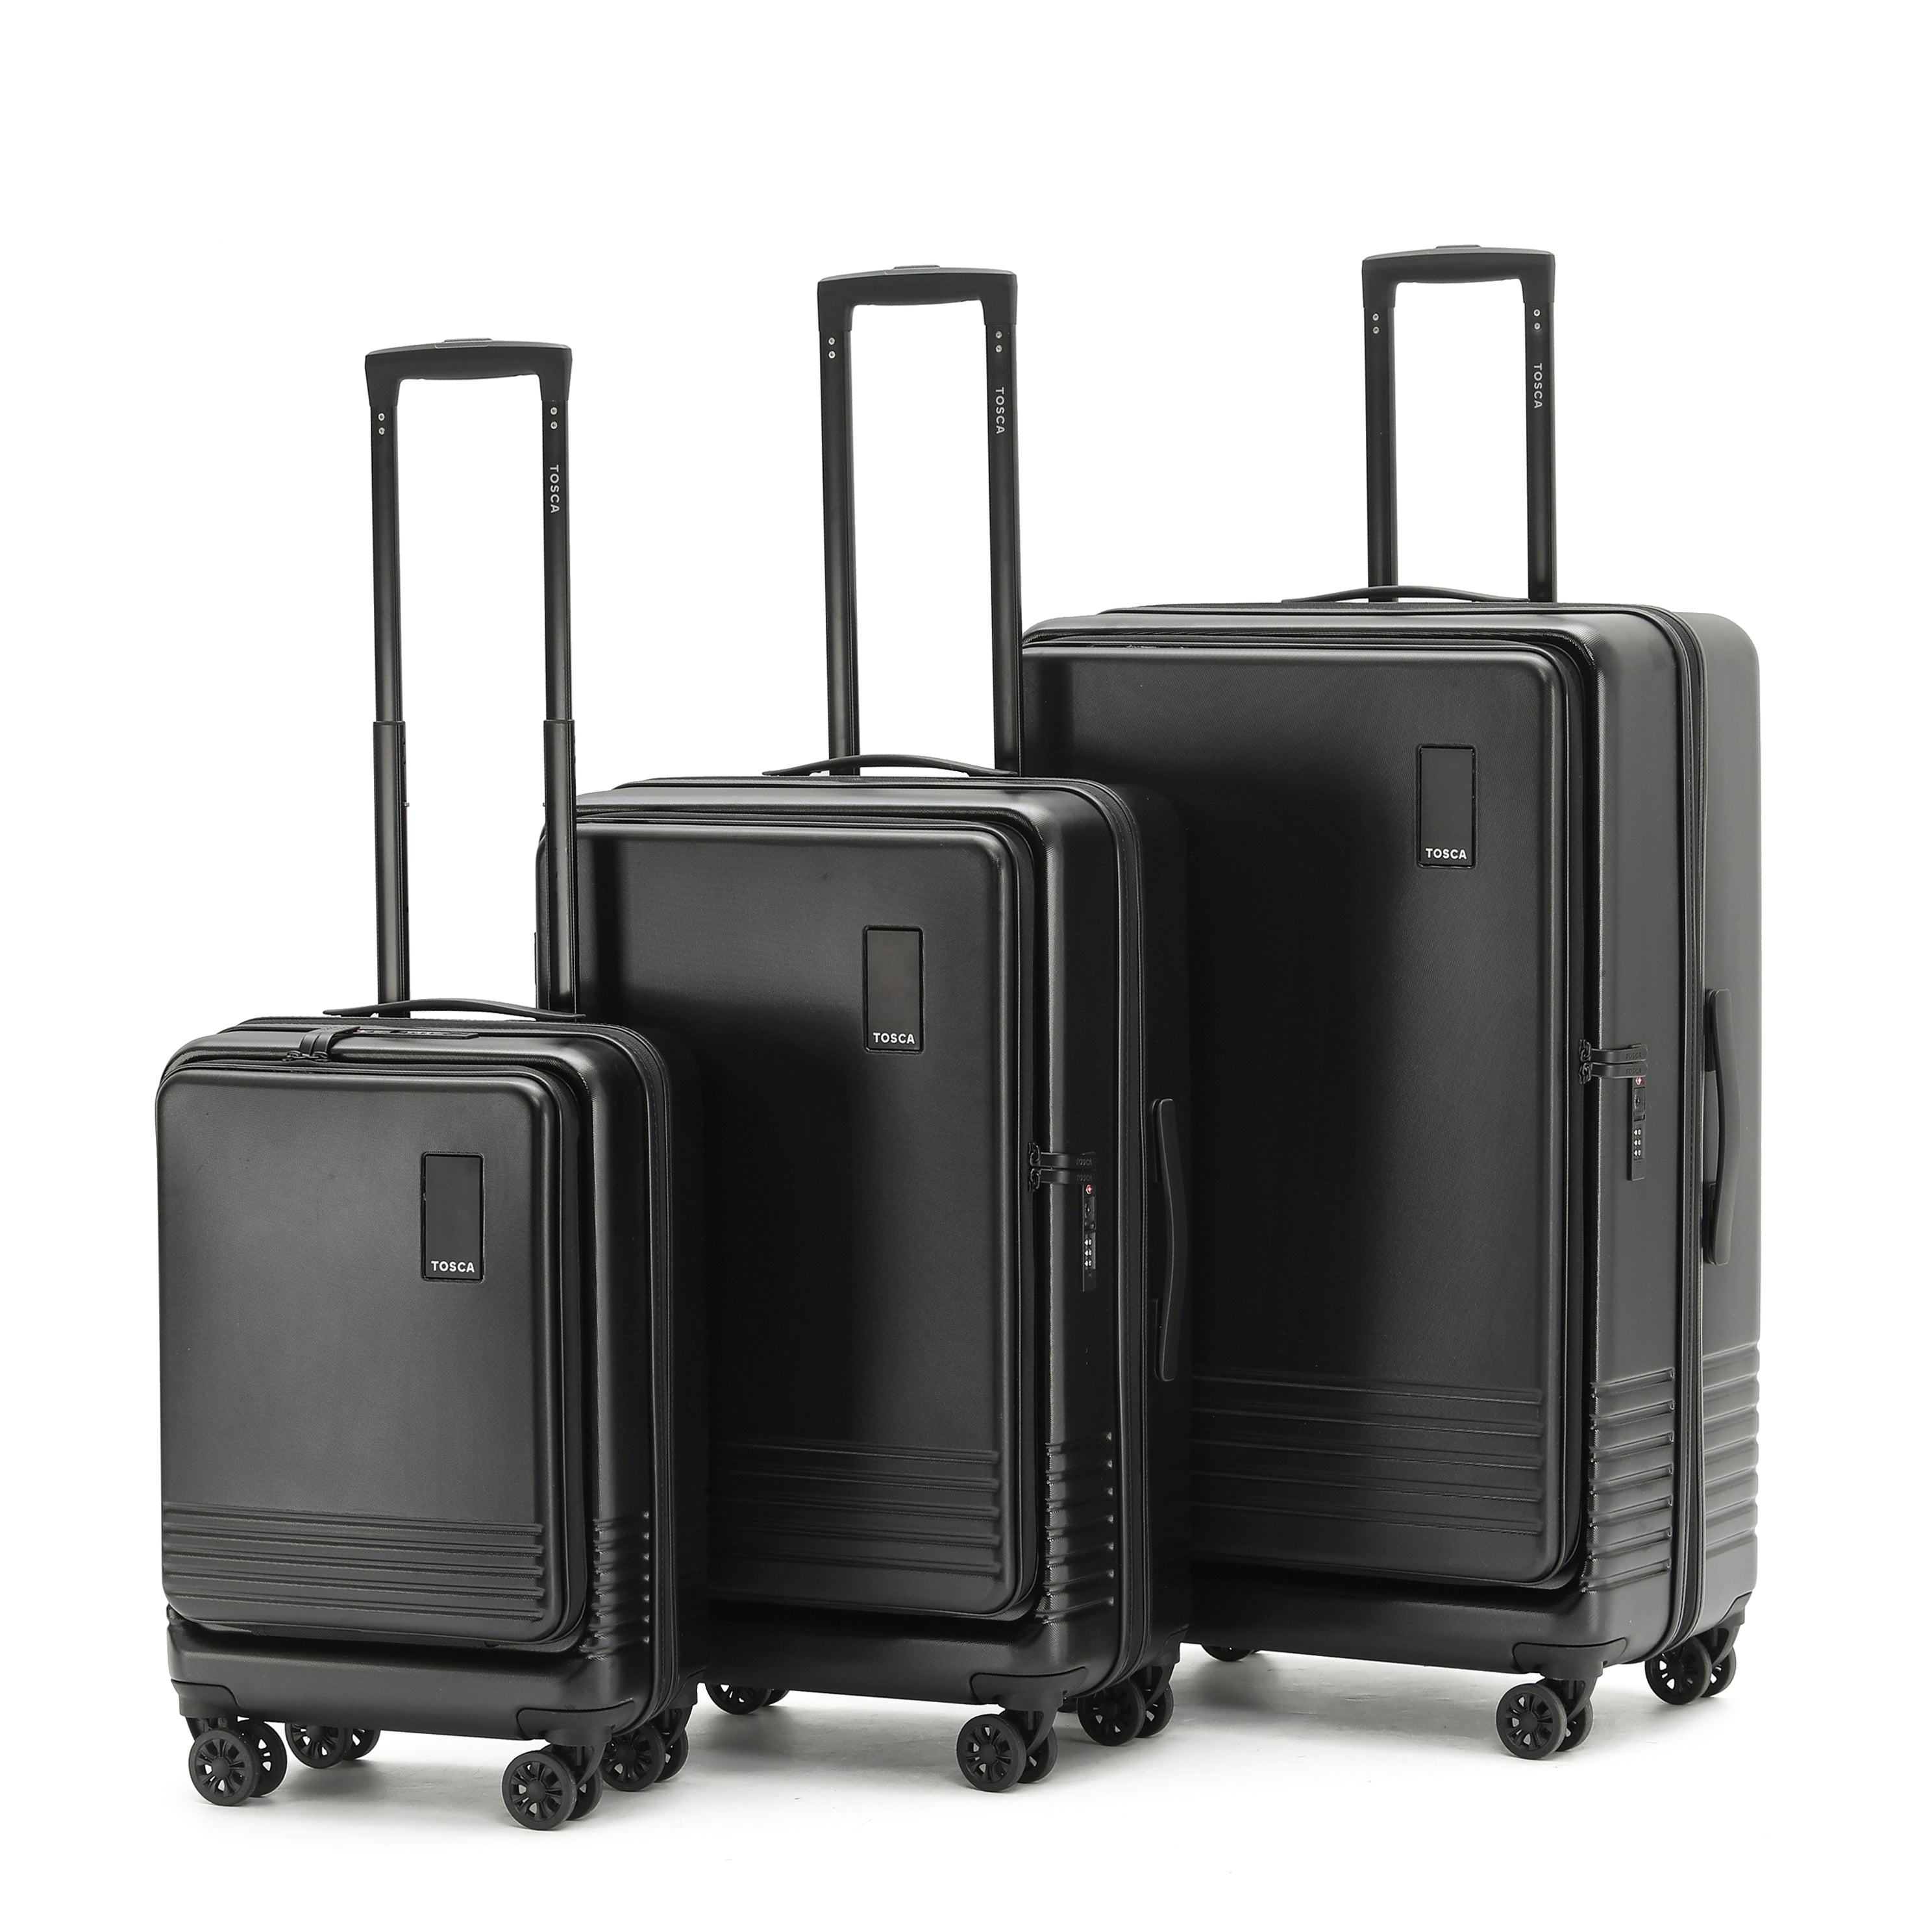 Tosca - TCA644 Horizon Front lid opening Set of 3 suitcases - Black - 0